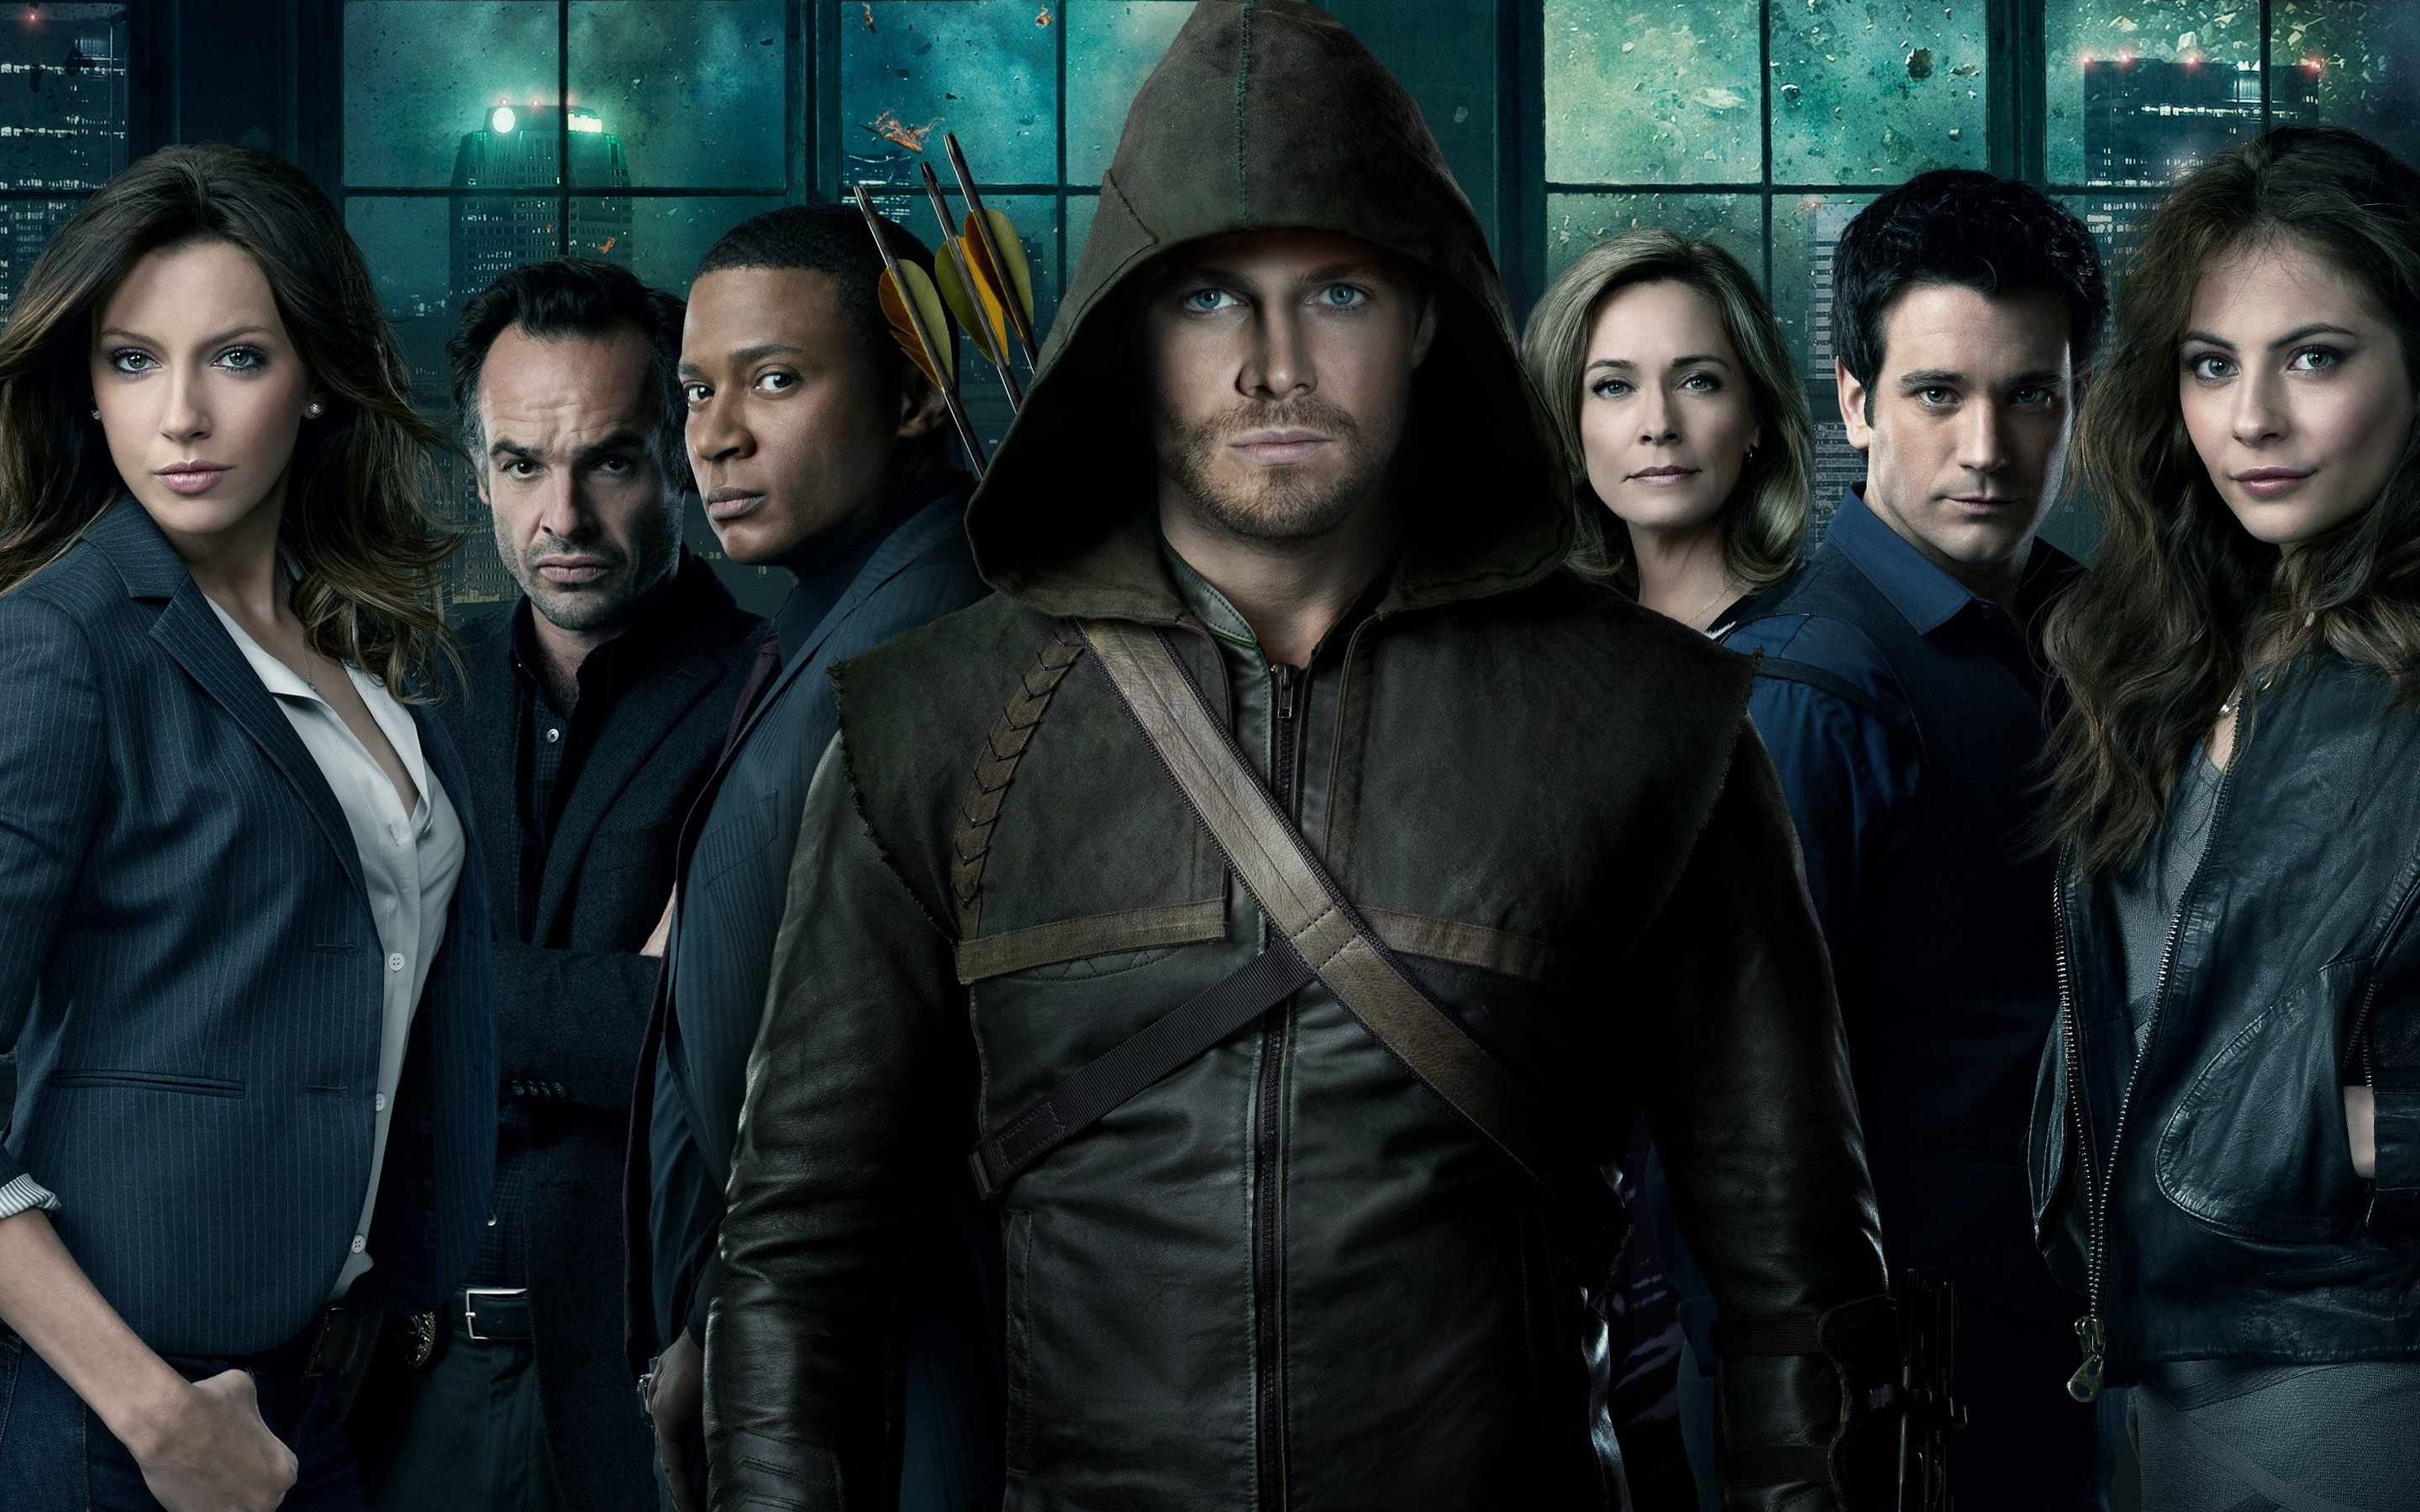 46 Arrow Season 3 Wallpaper On Wallpapersafari Thousands of new arrows png image resources are added every day. arrow season 3 wallpaper on wallpapersafari